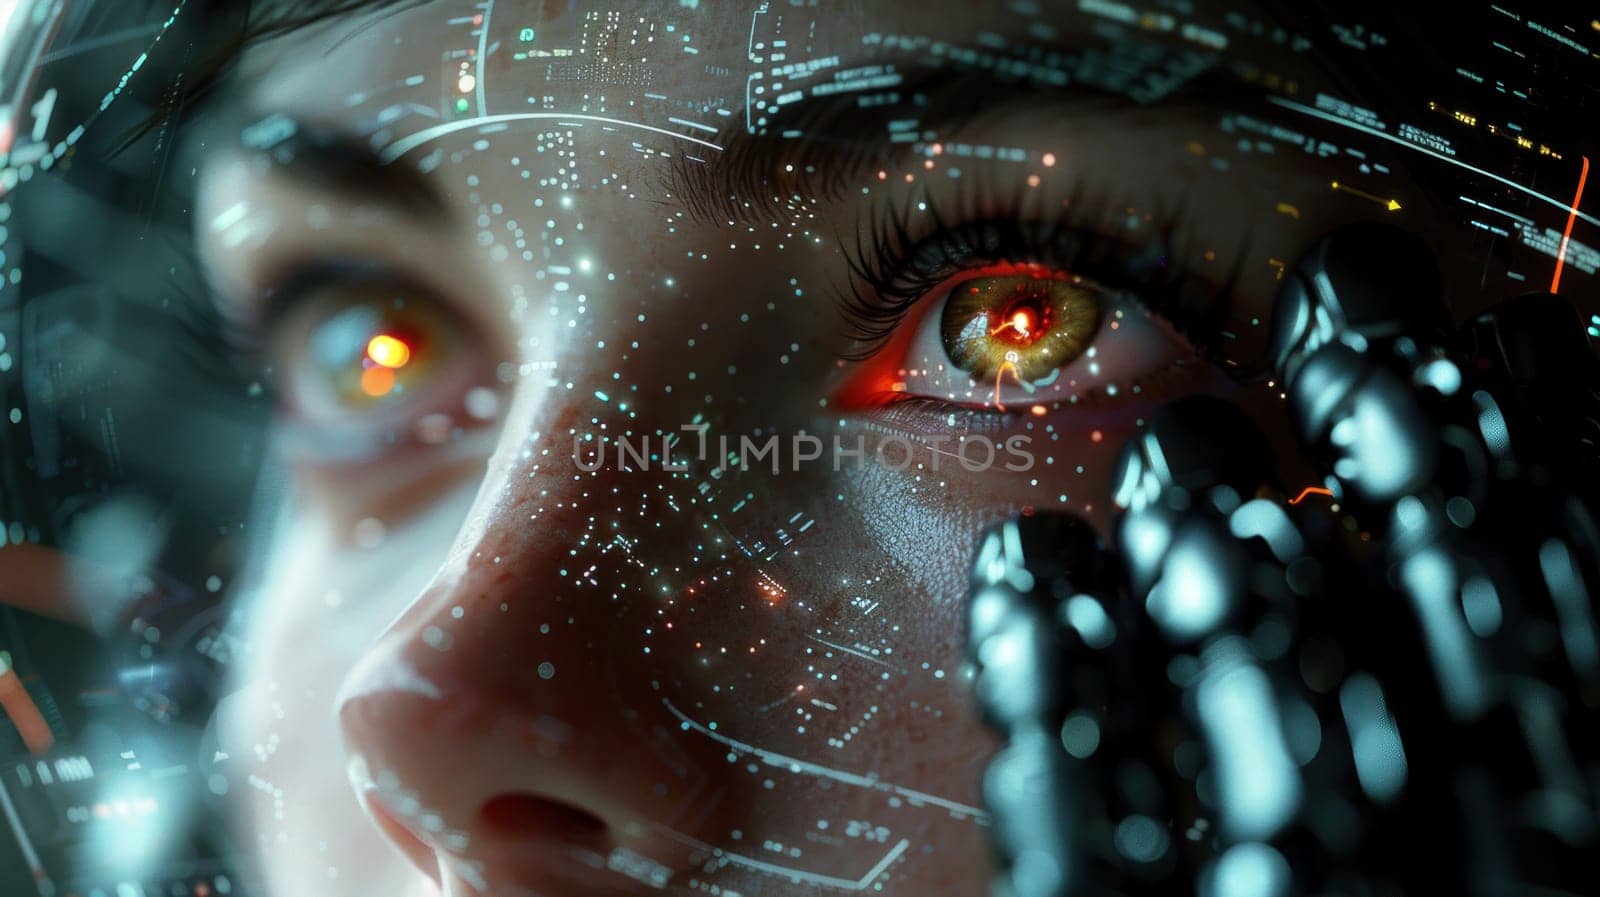 A close-up of a womans face with eyes glowing brightly, suggesting advanced technology or futuristic scanning capabilities.